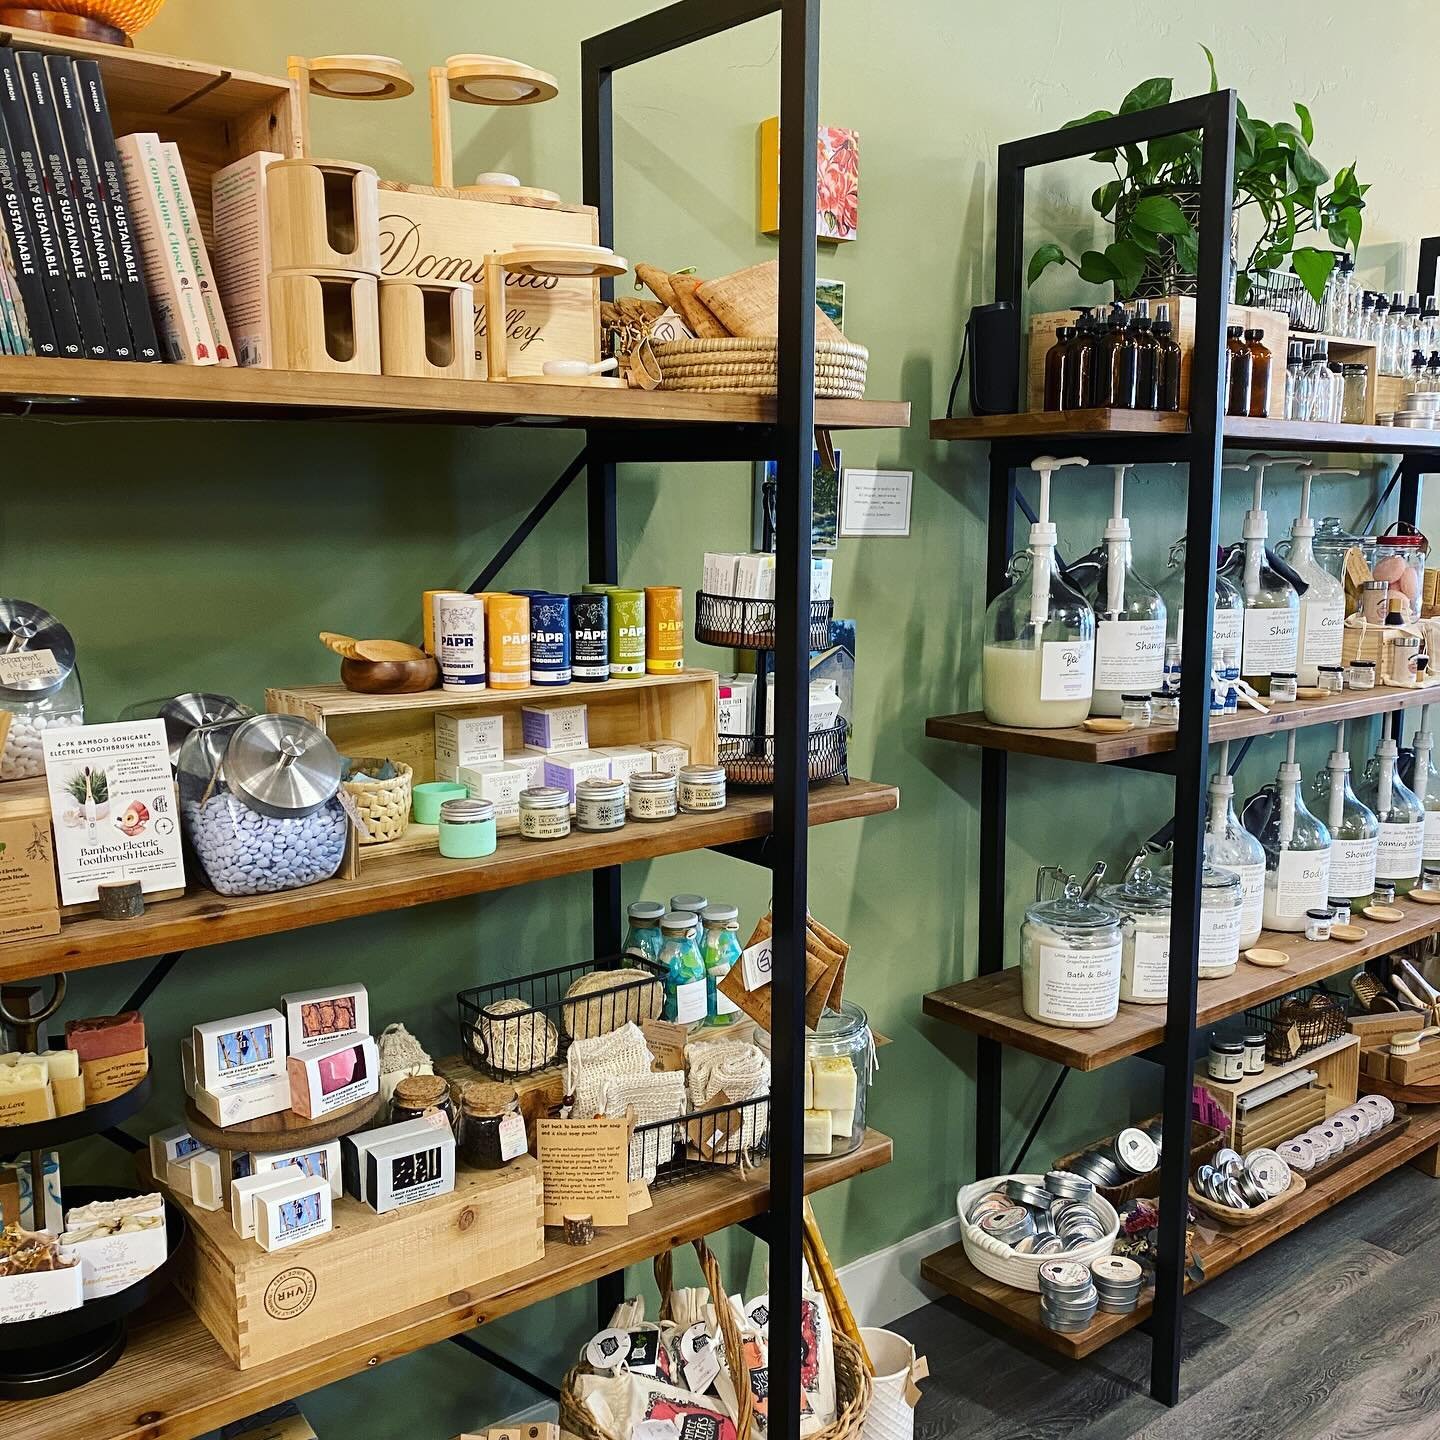 Did you know @socotradingcompany has a new amazing space in downtown Cloverdale?  They have refill and resale and repurpose (and hopefully we&rsquo;ll be doing some repair there soon!)

They are also in Windsor (inside the Raley&rsquo;s!) just down t